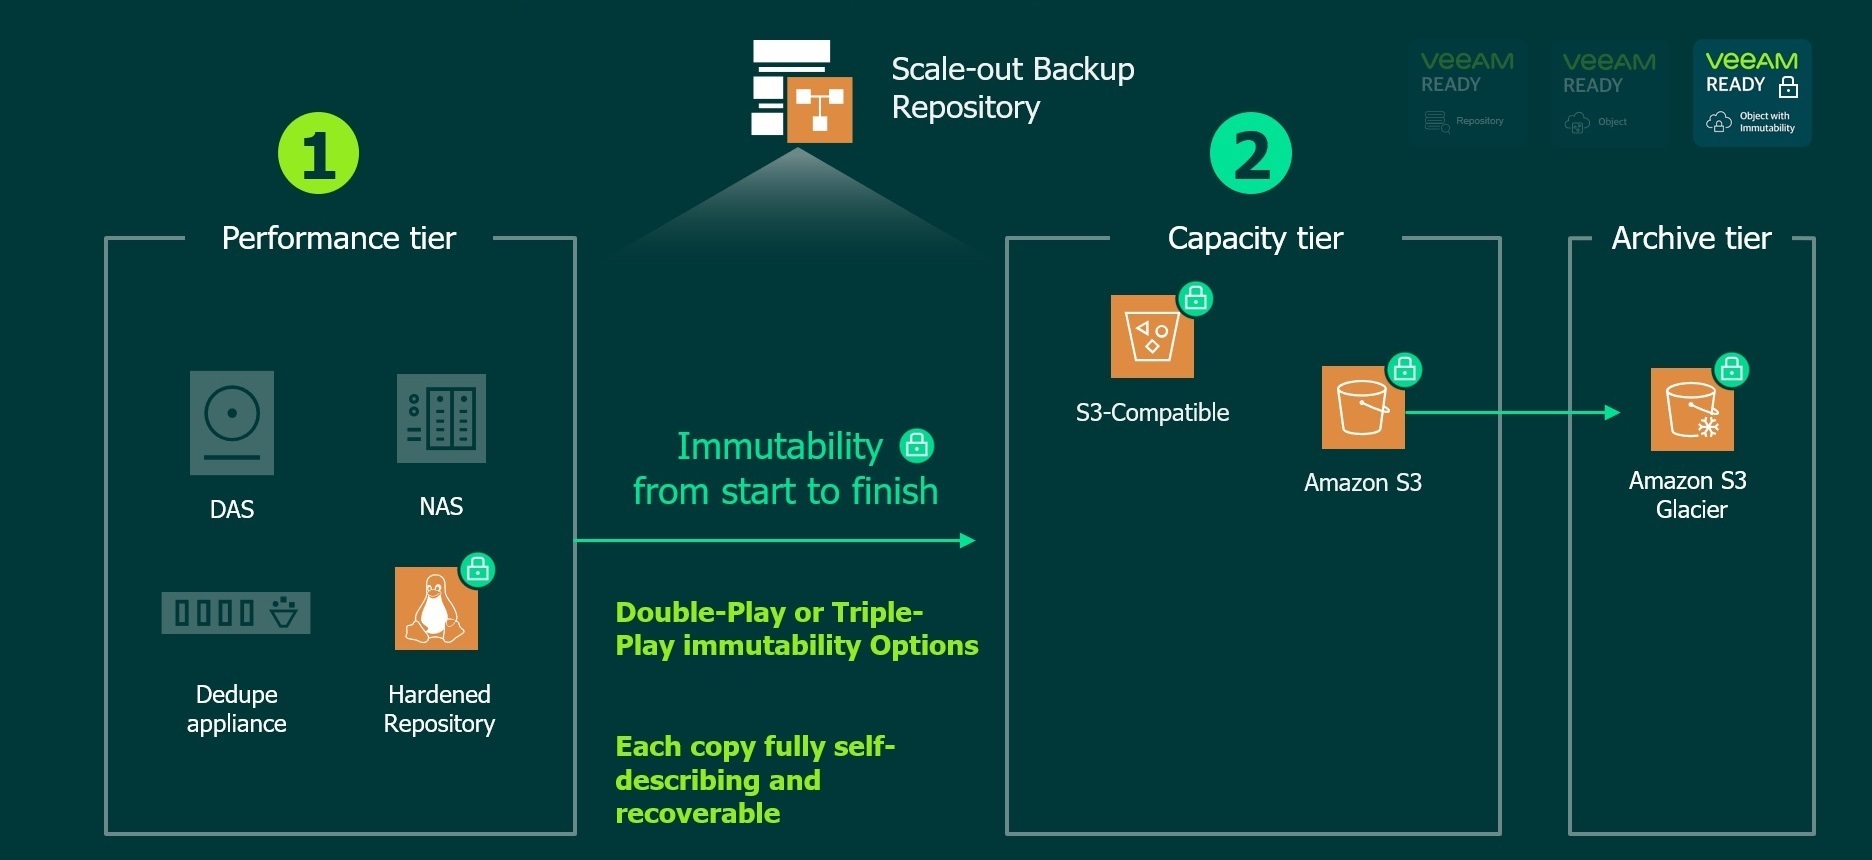 Beat Ransomware with Double-Play Immutability from Veeam